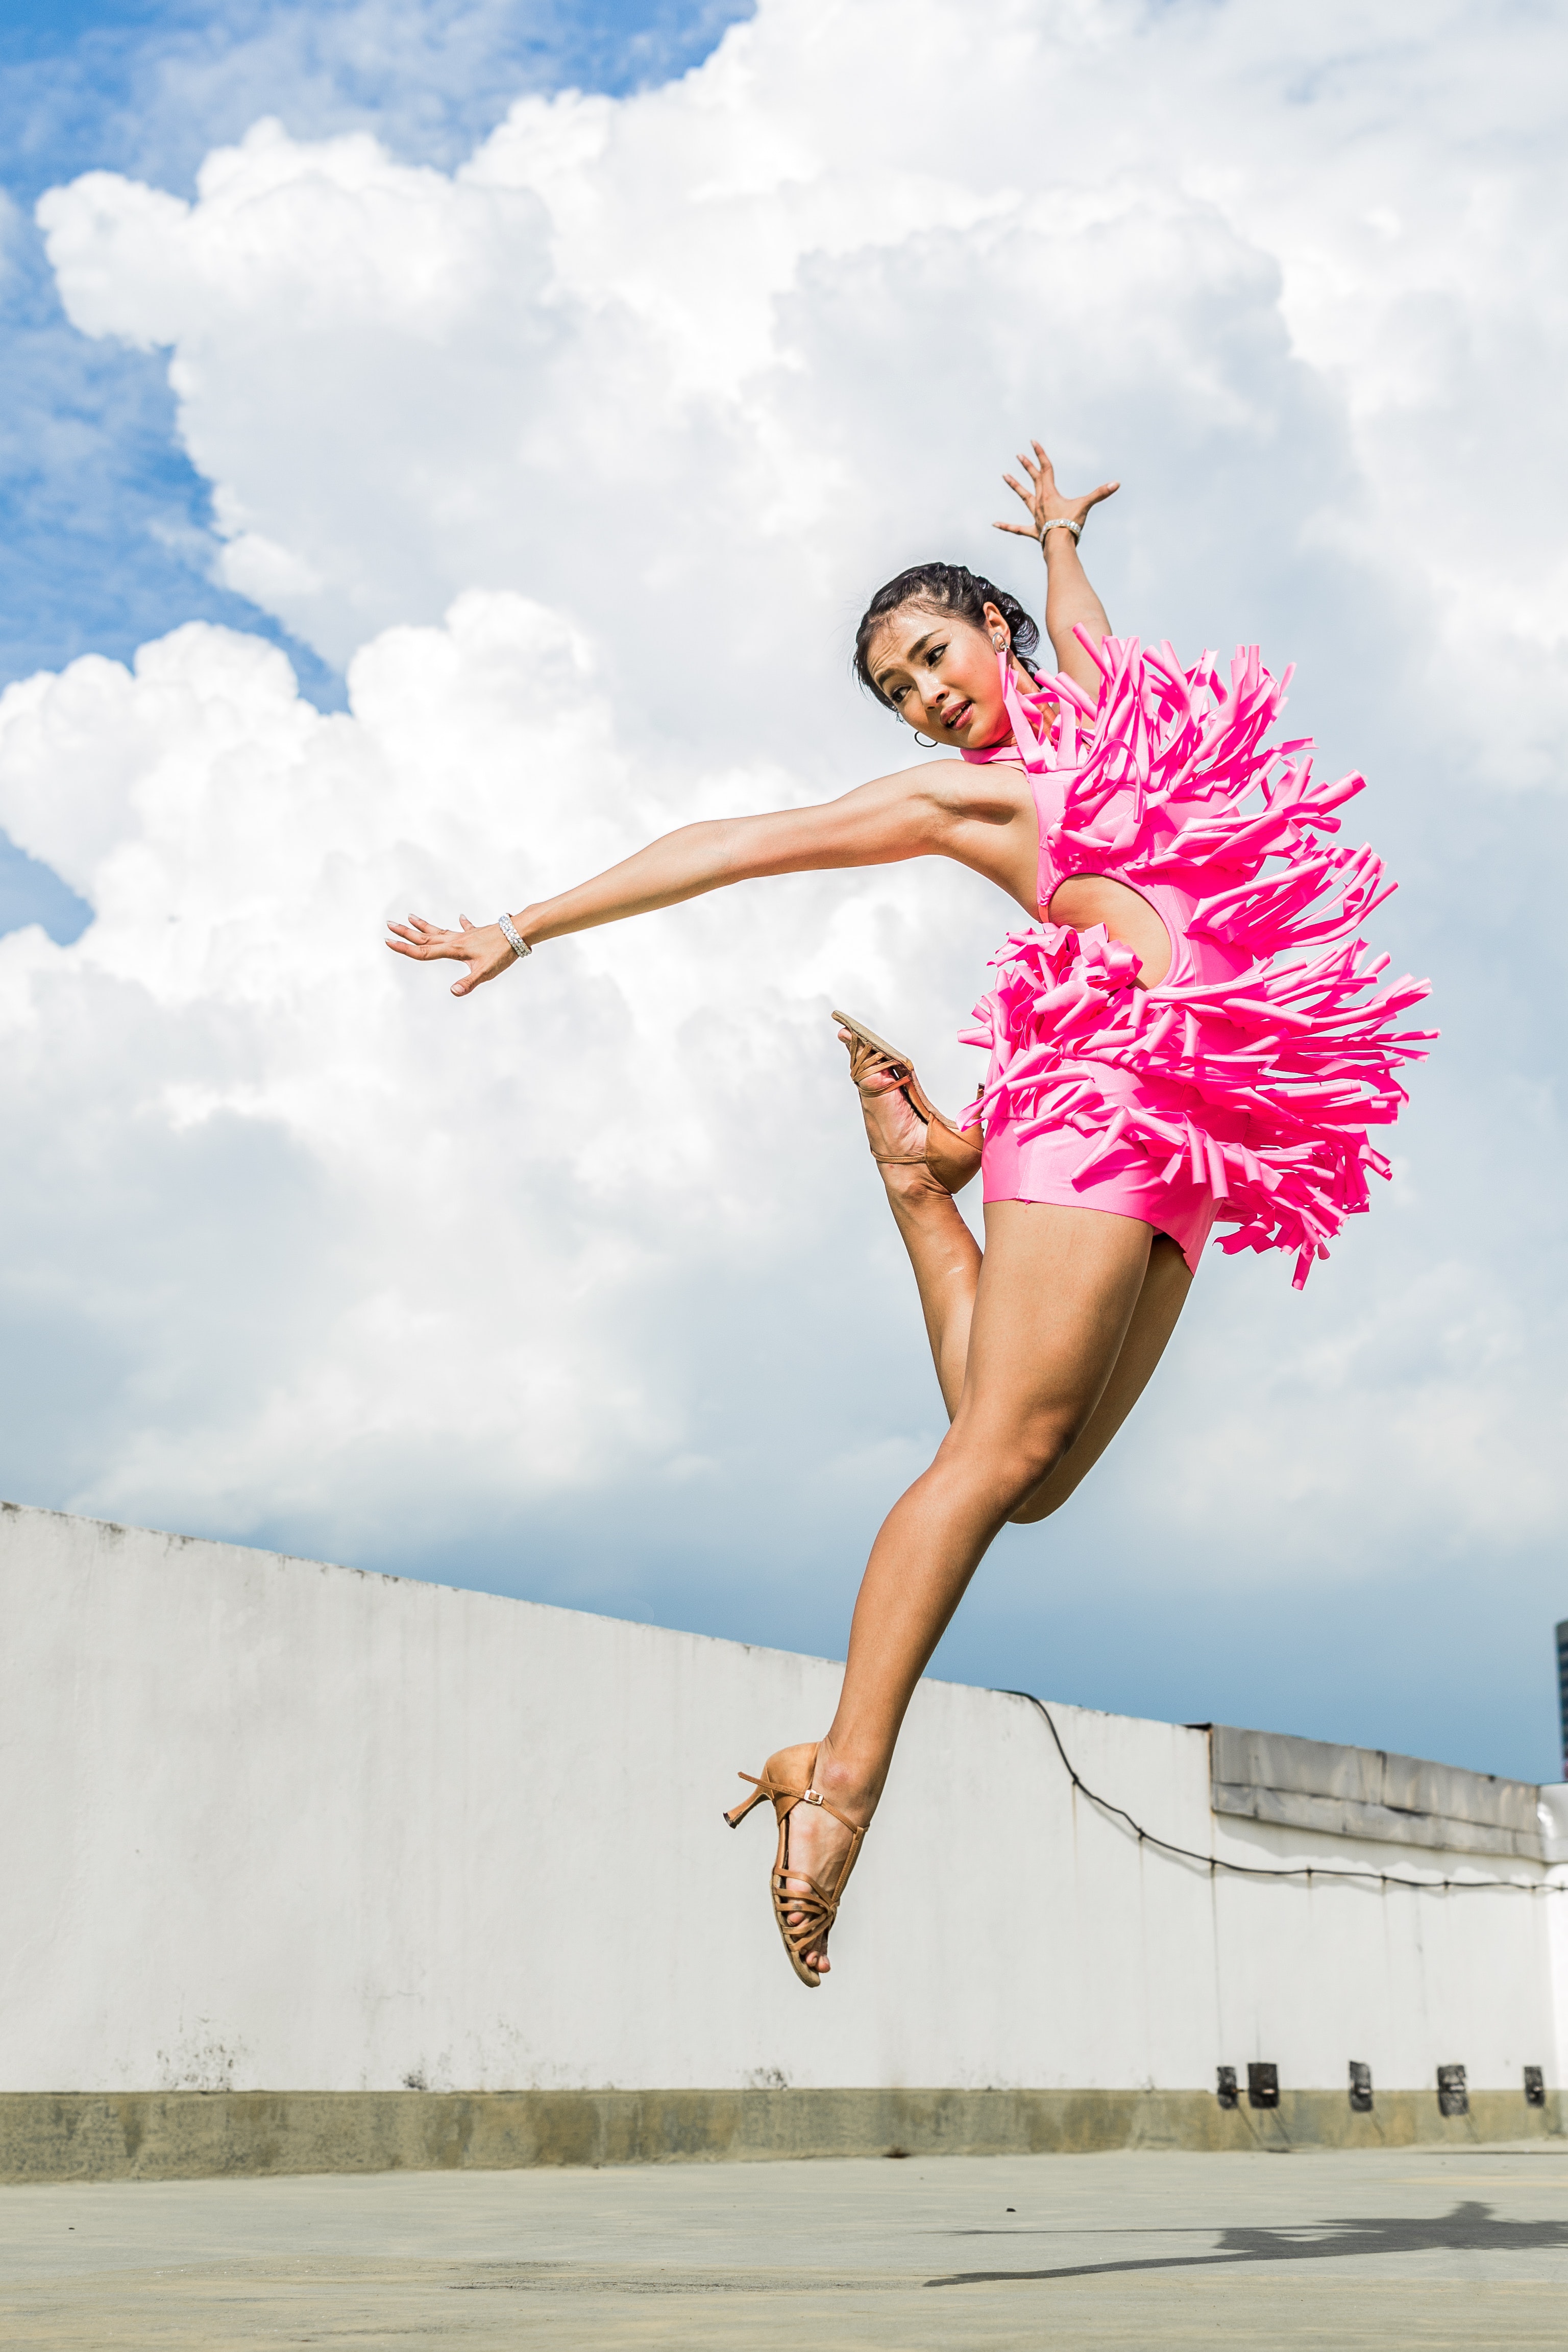 Woman in pink dress doing jump shot while extending arms under white clouds photo